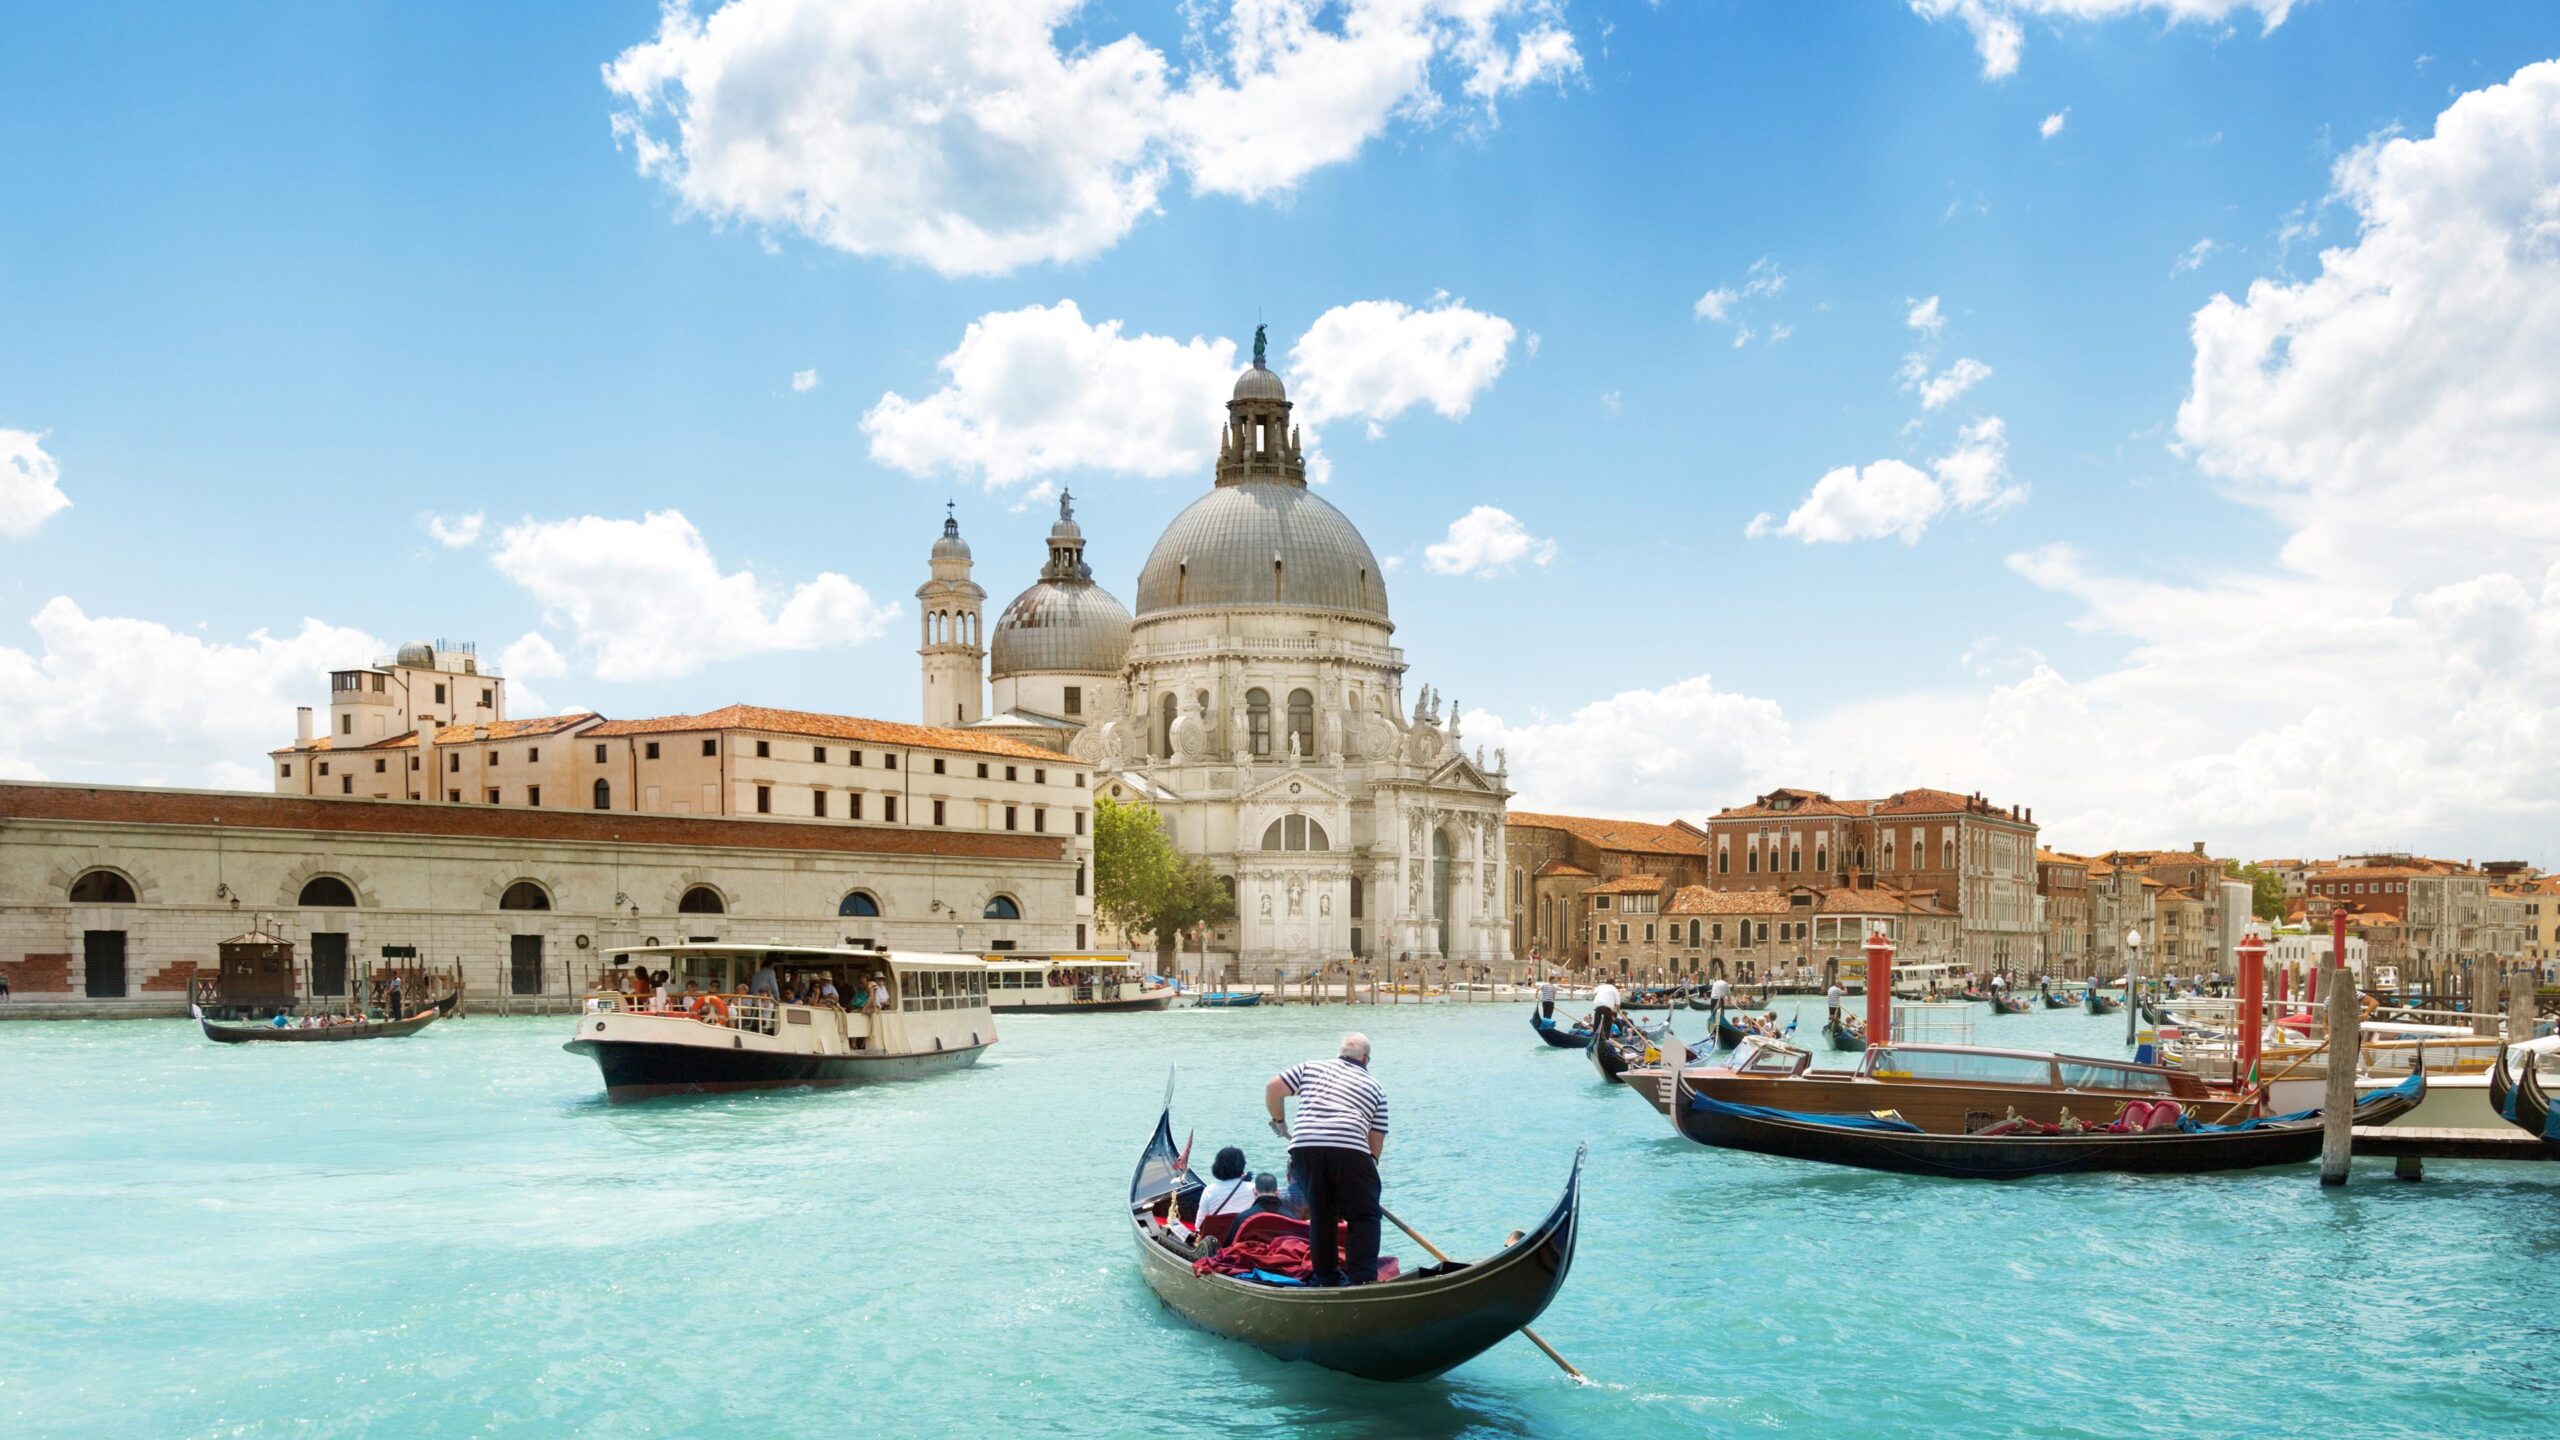 Grand Canal Venice 4K Ultra HD wallpapers